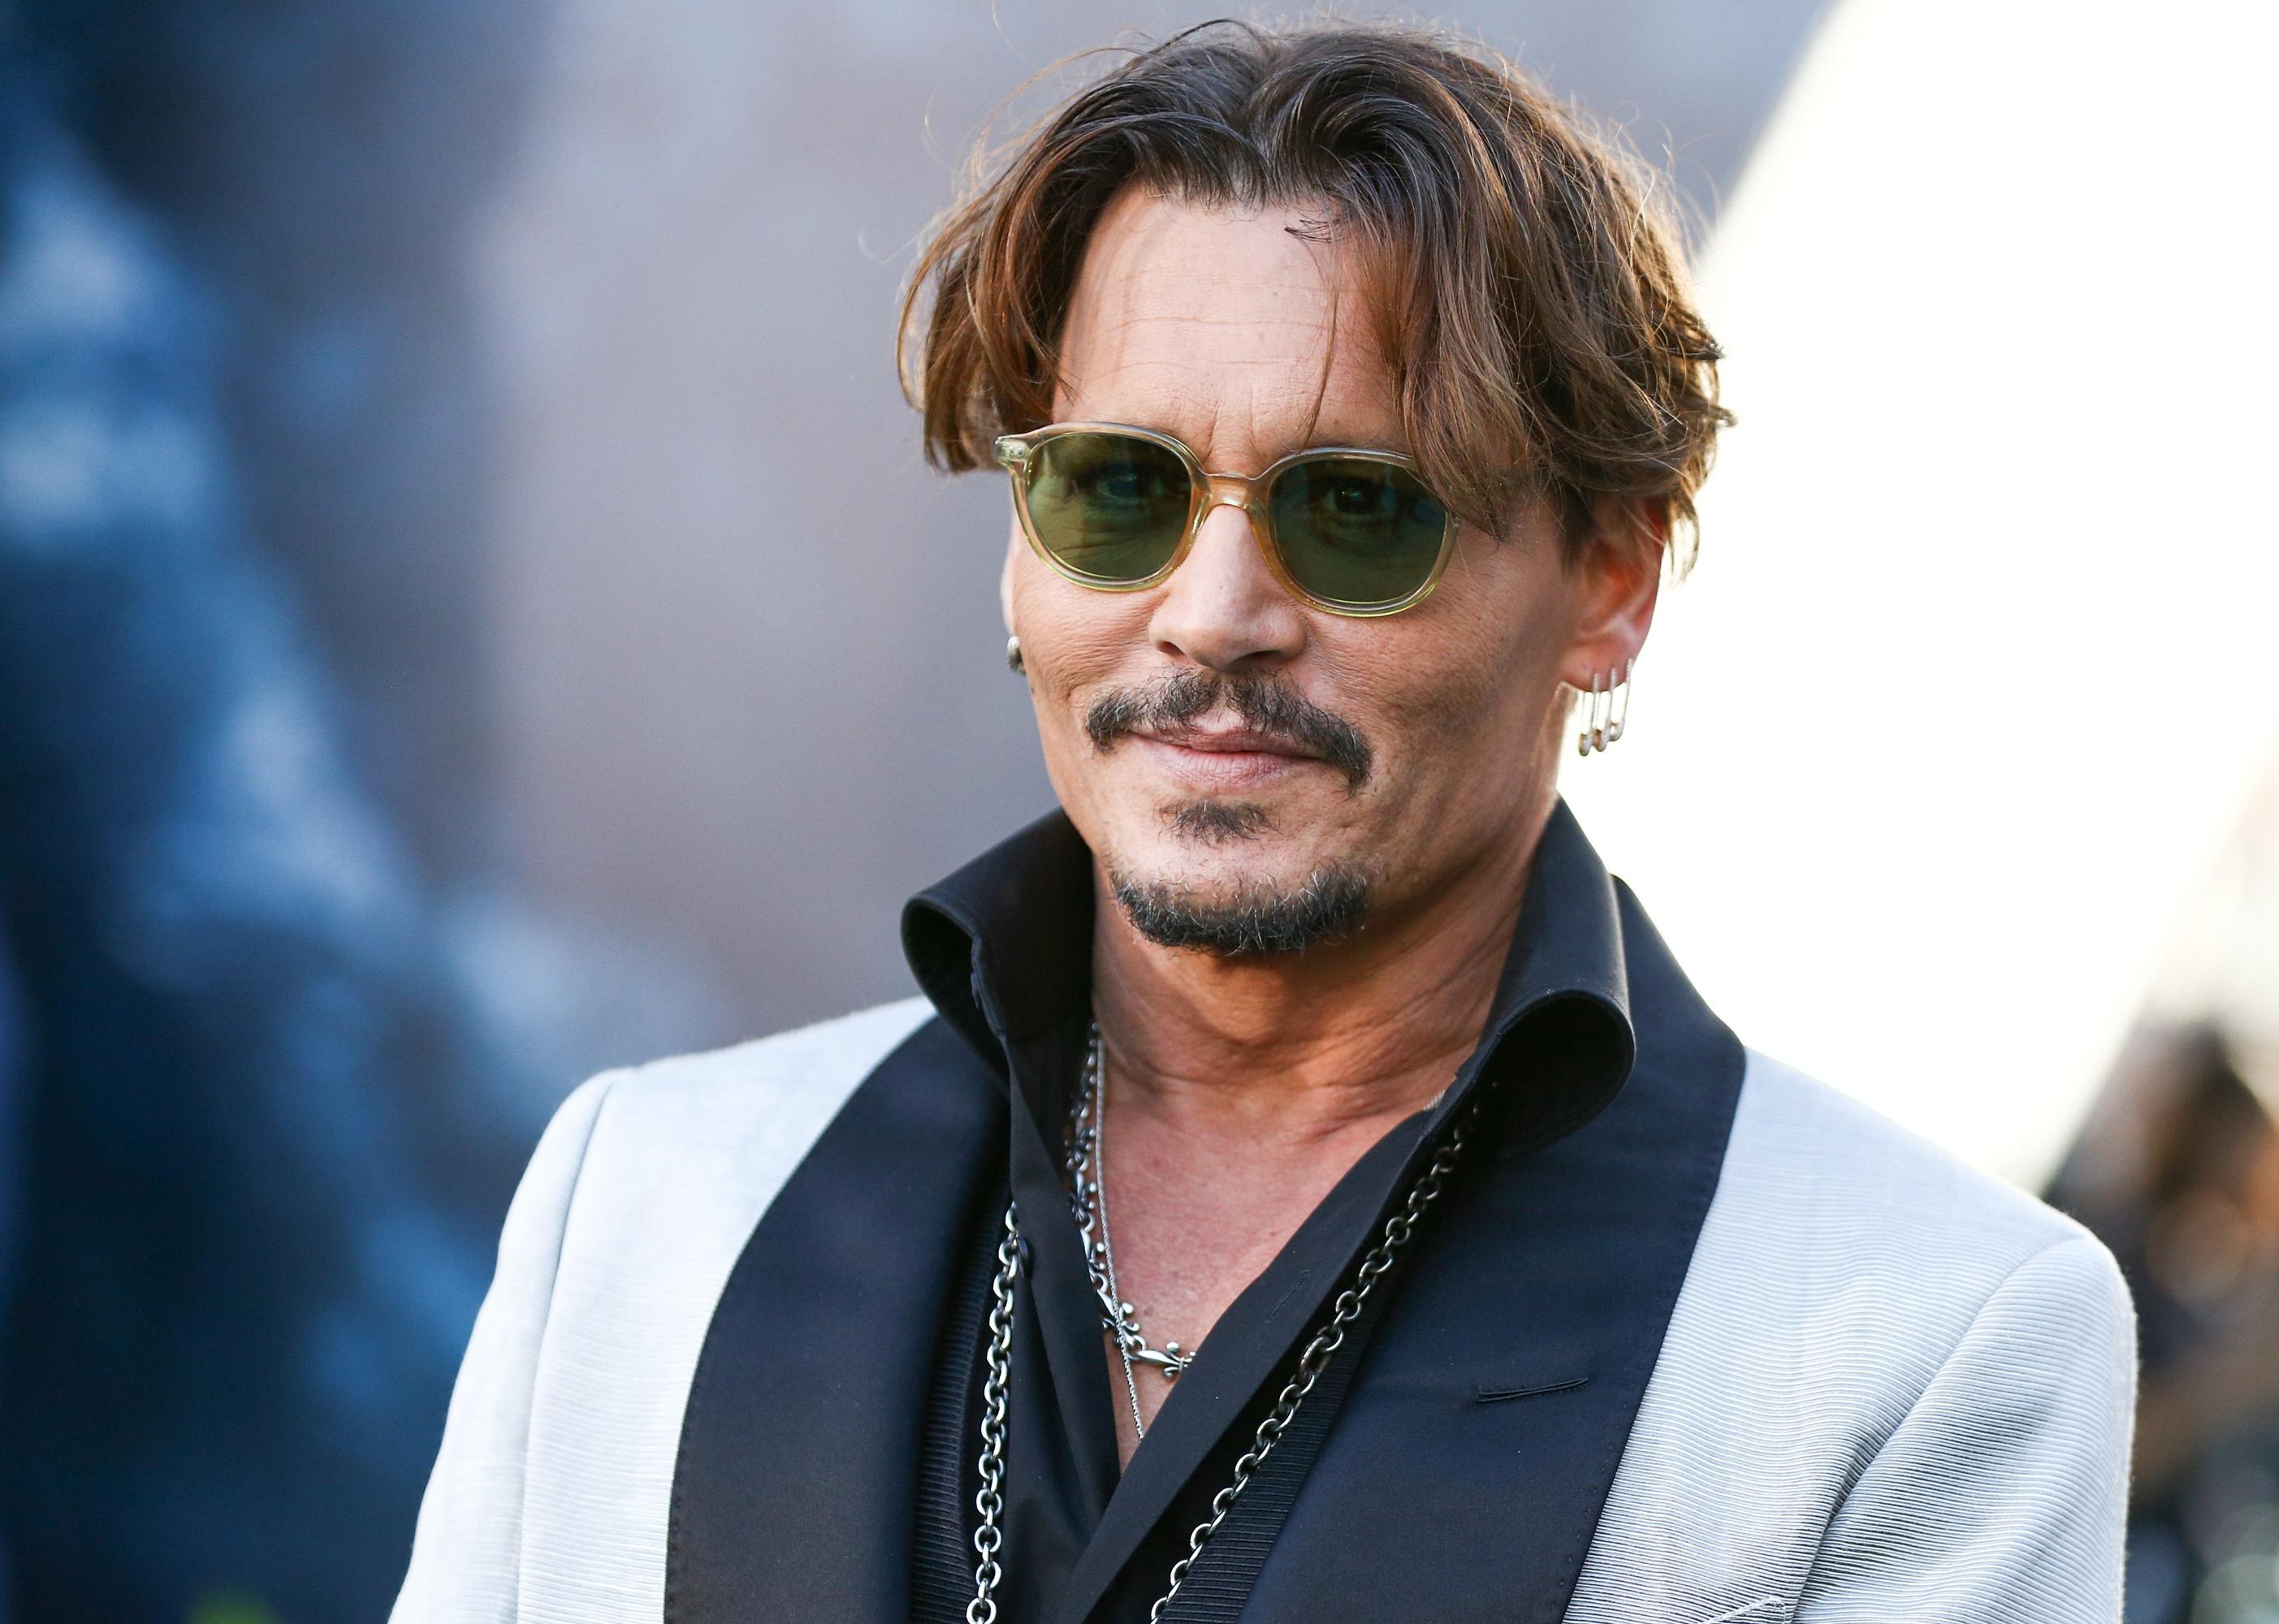 Johnny Depp attends the premiere of Disney's 'Pirates Of The Caribbean: Dead Men Tell No Tales'.